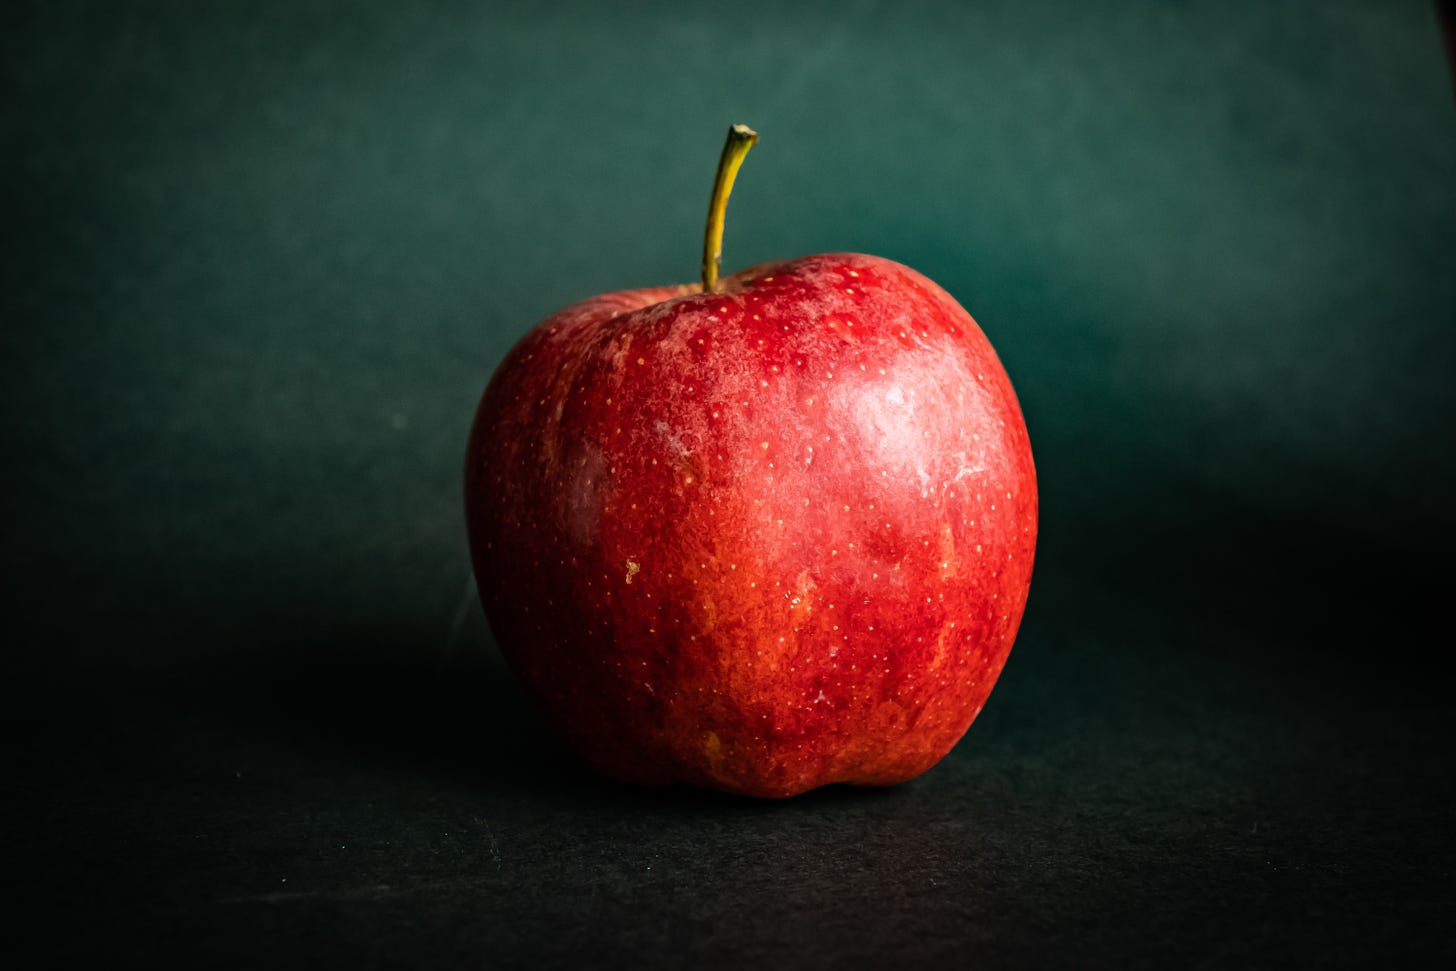 Photo of a red apple with  stem against a dark green backdrop.